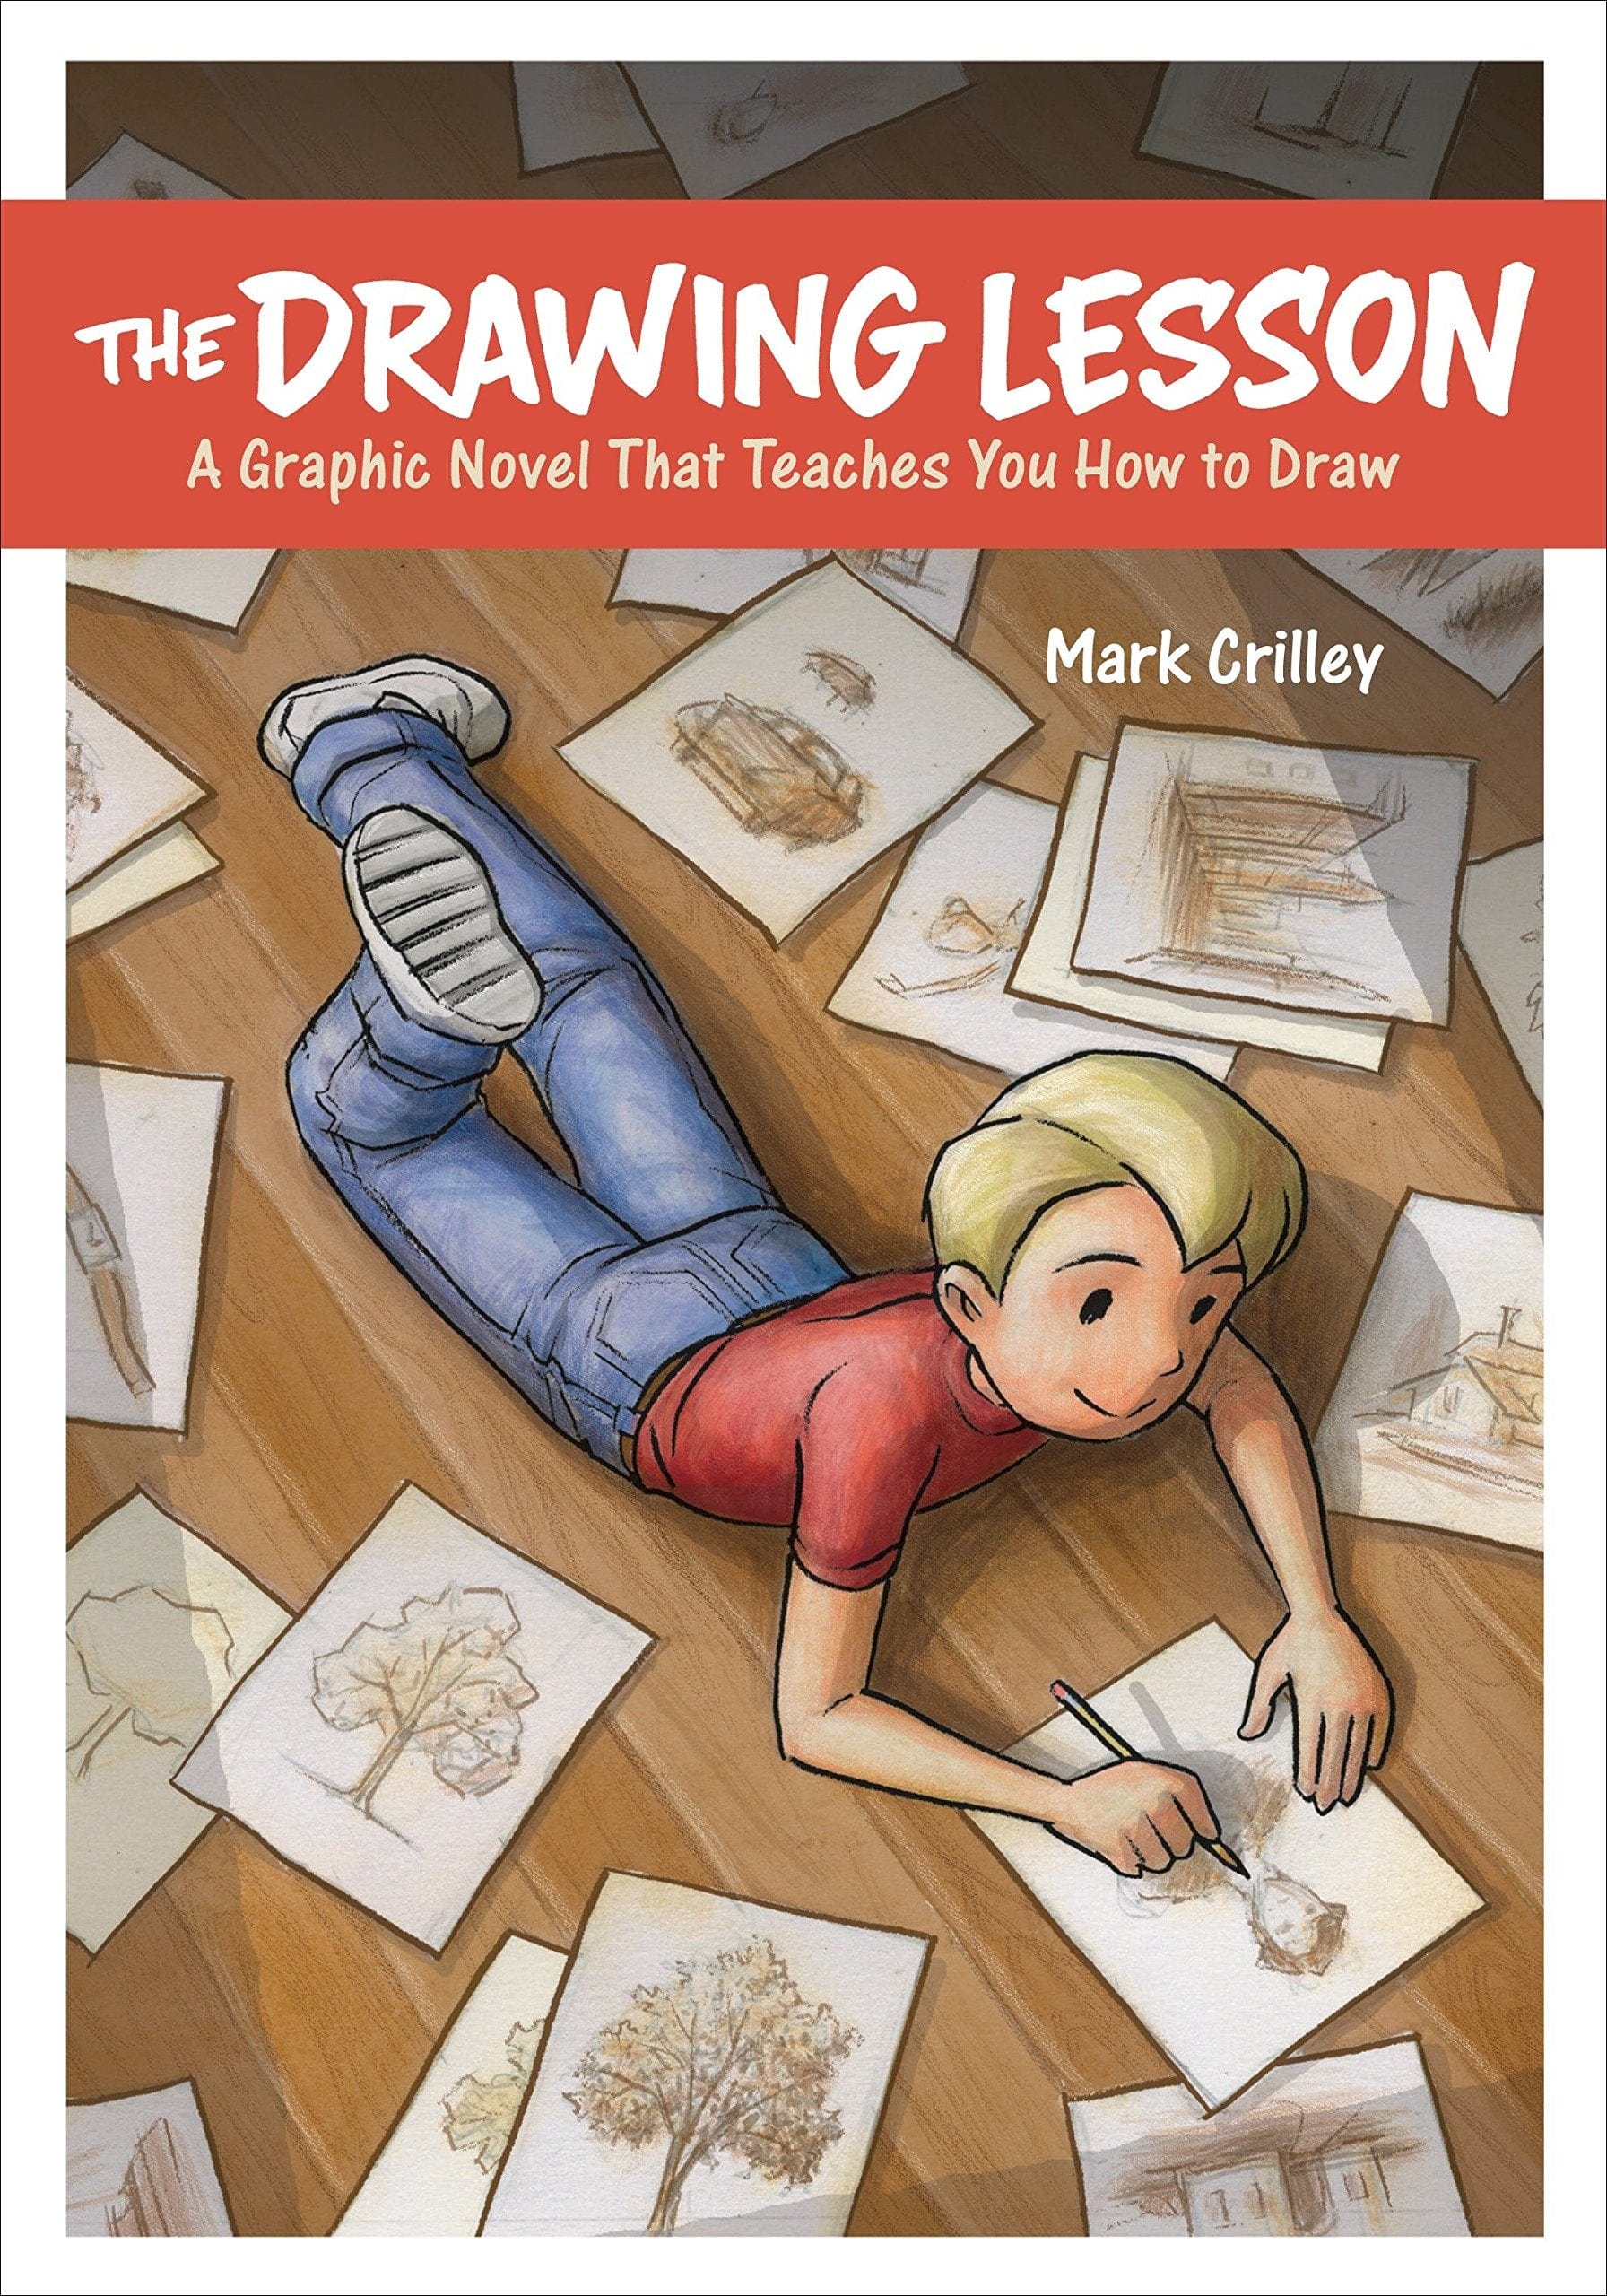 DRAWING LESSON GRAPHIC NOVEL TEACHES YOU HOW TO DRAW - Third Eye